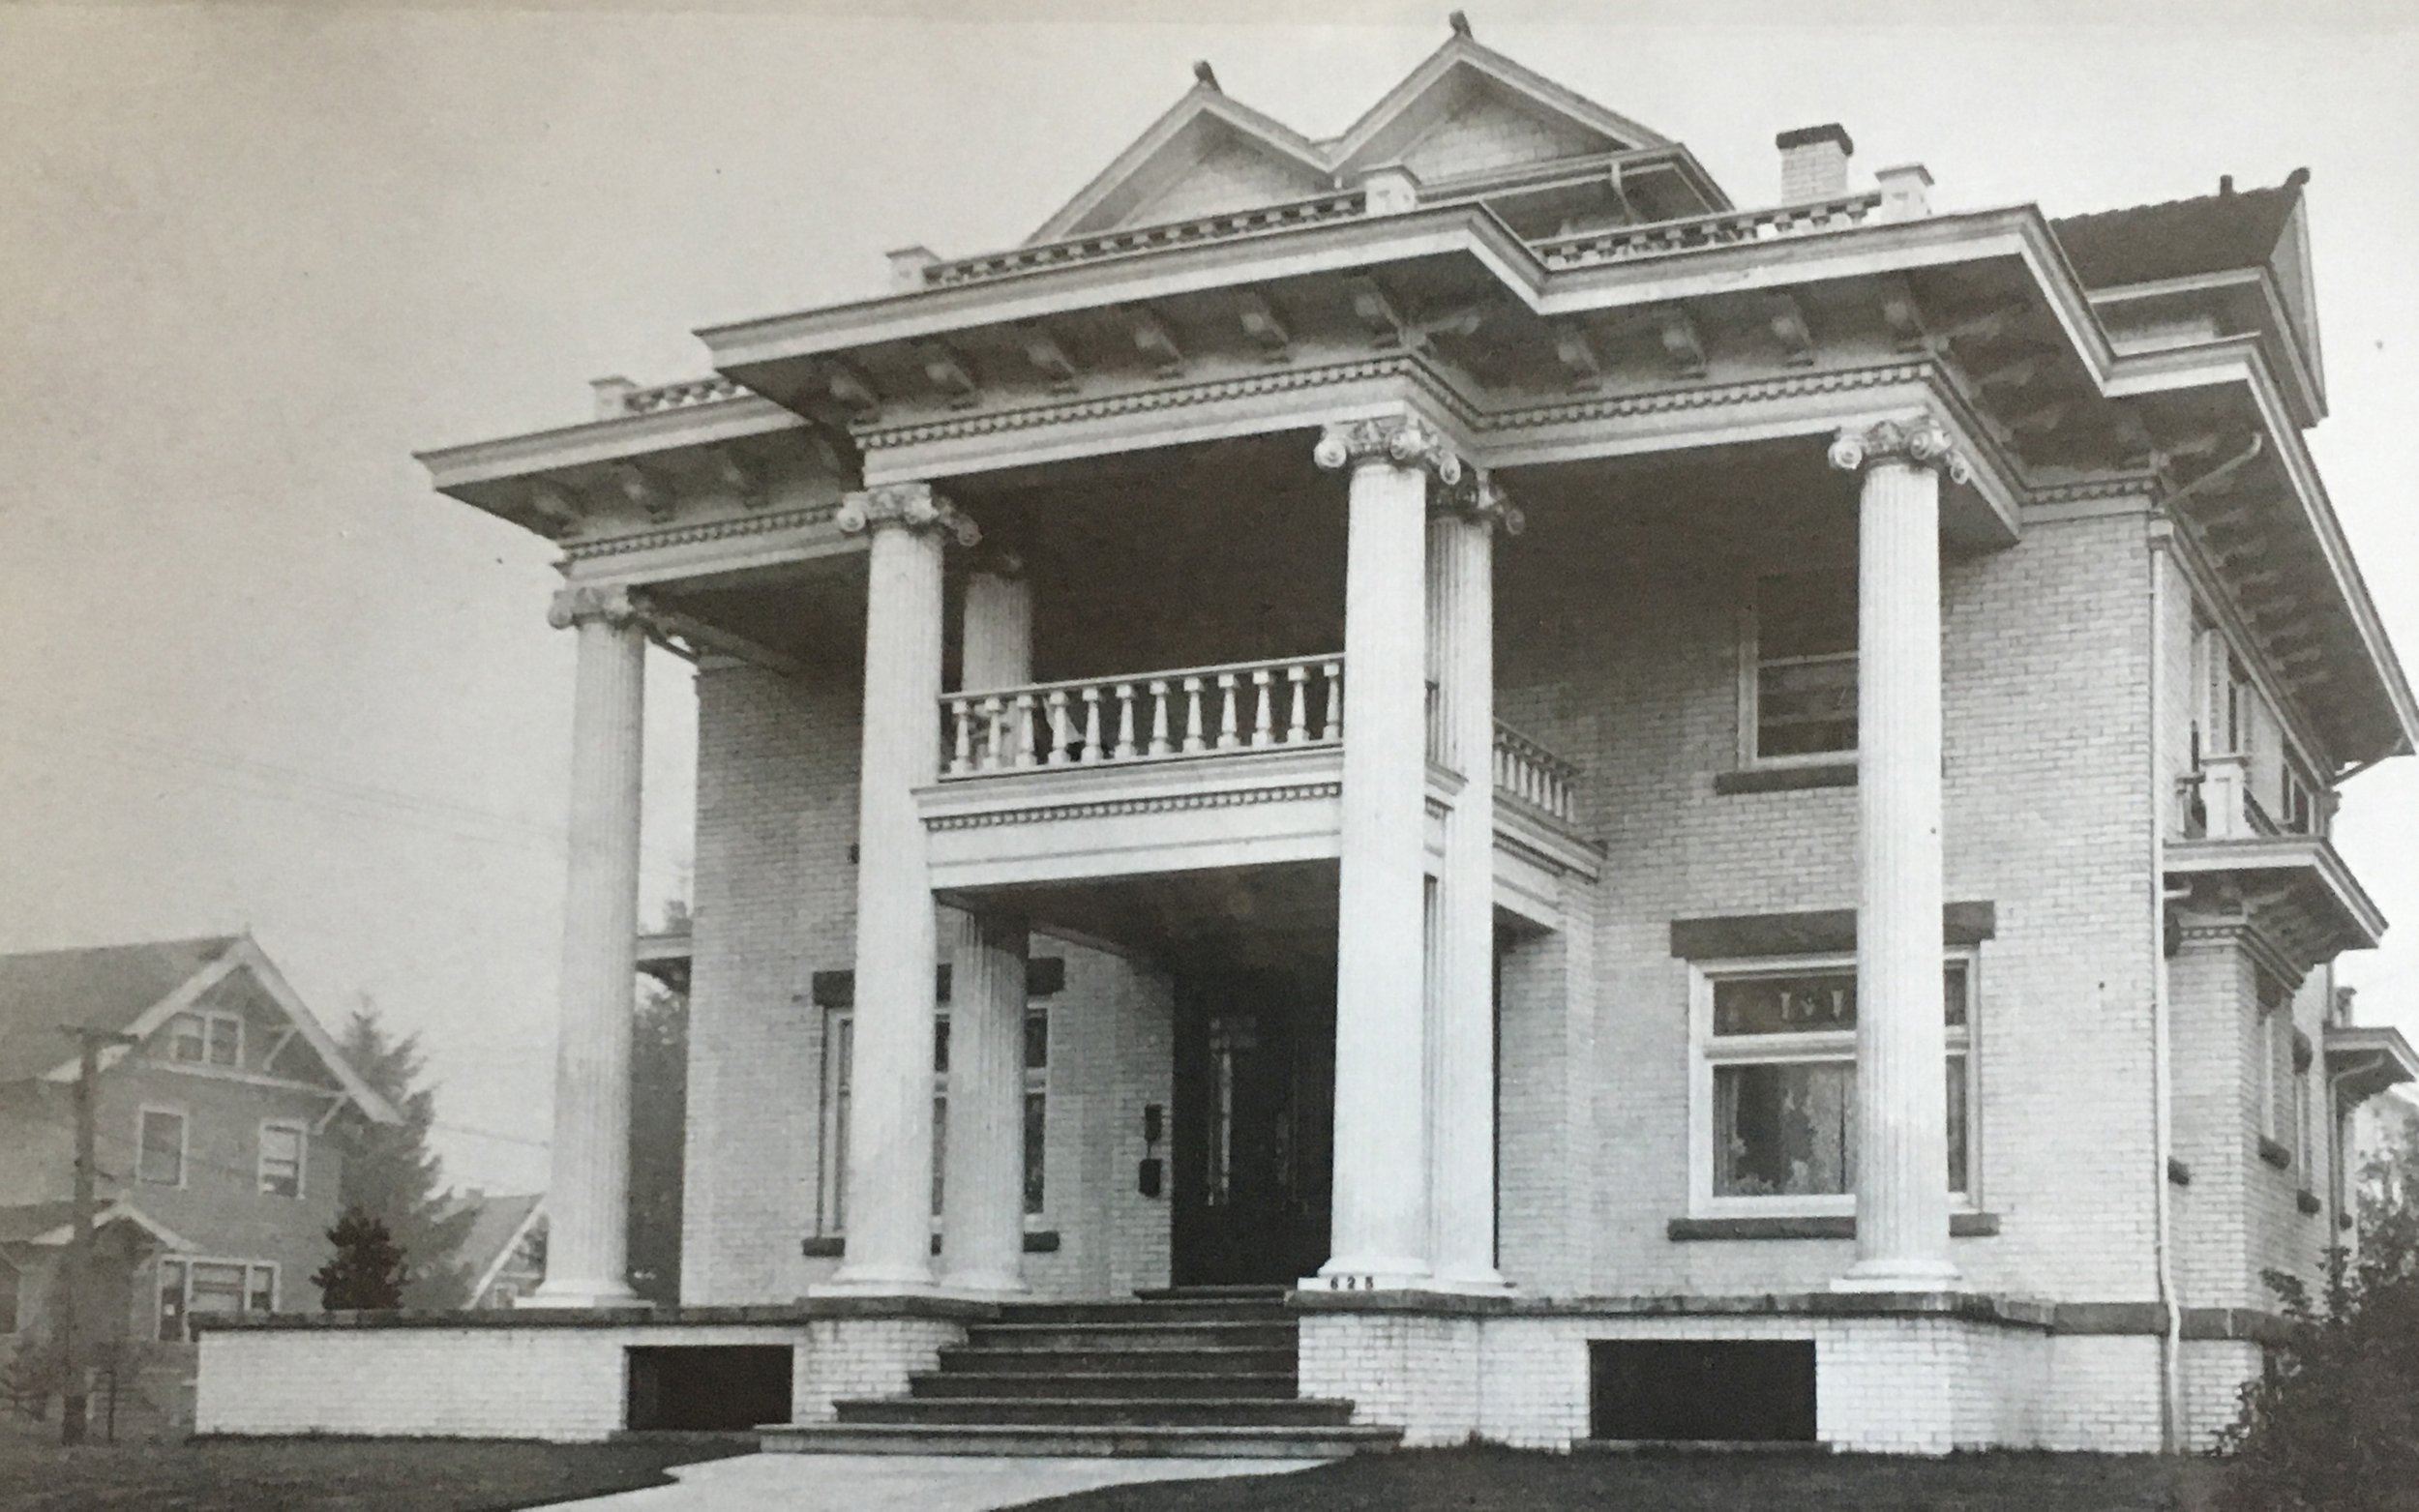  1609 NE Knott, built by Archie Rice, just after completion, ca. 1913. 